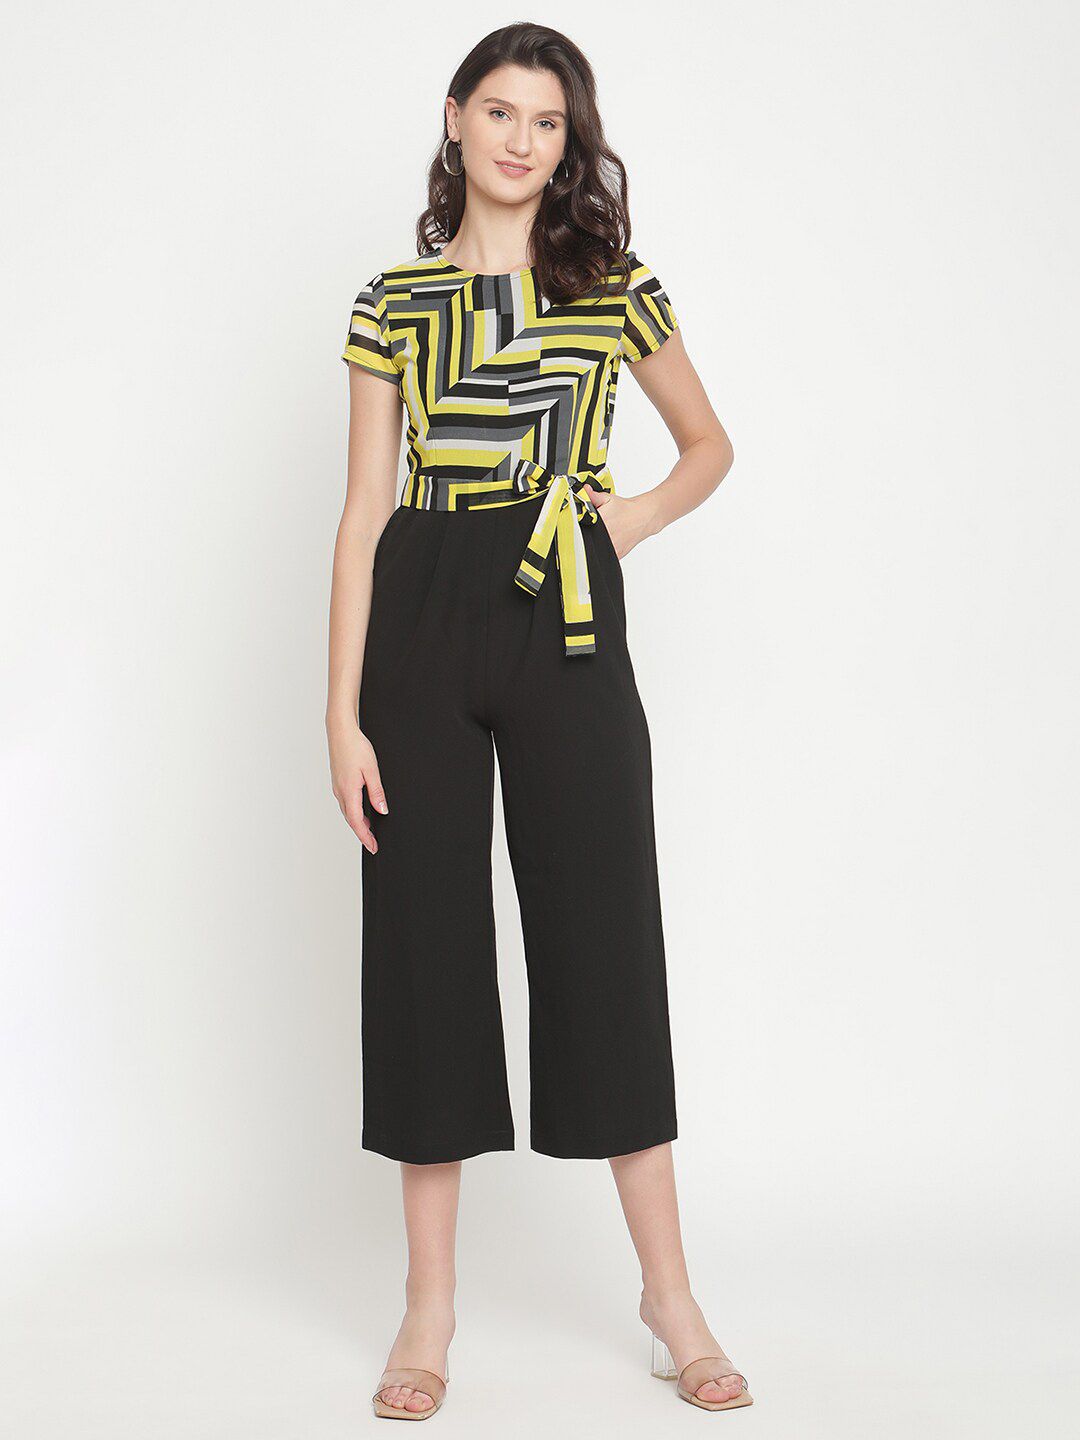 THREAD MUSTER Black & Yellow Colourblocked Basic Jumpsuit Price in India